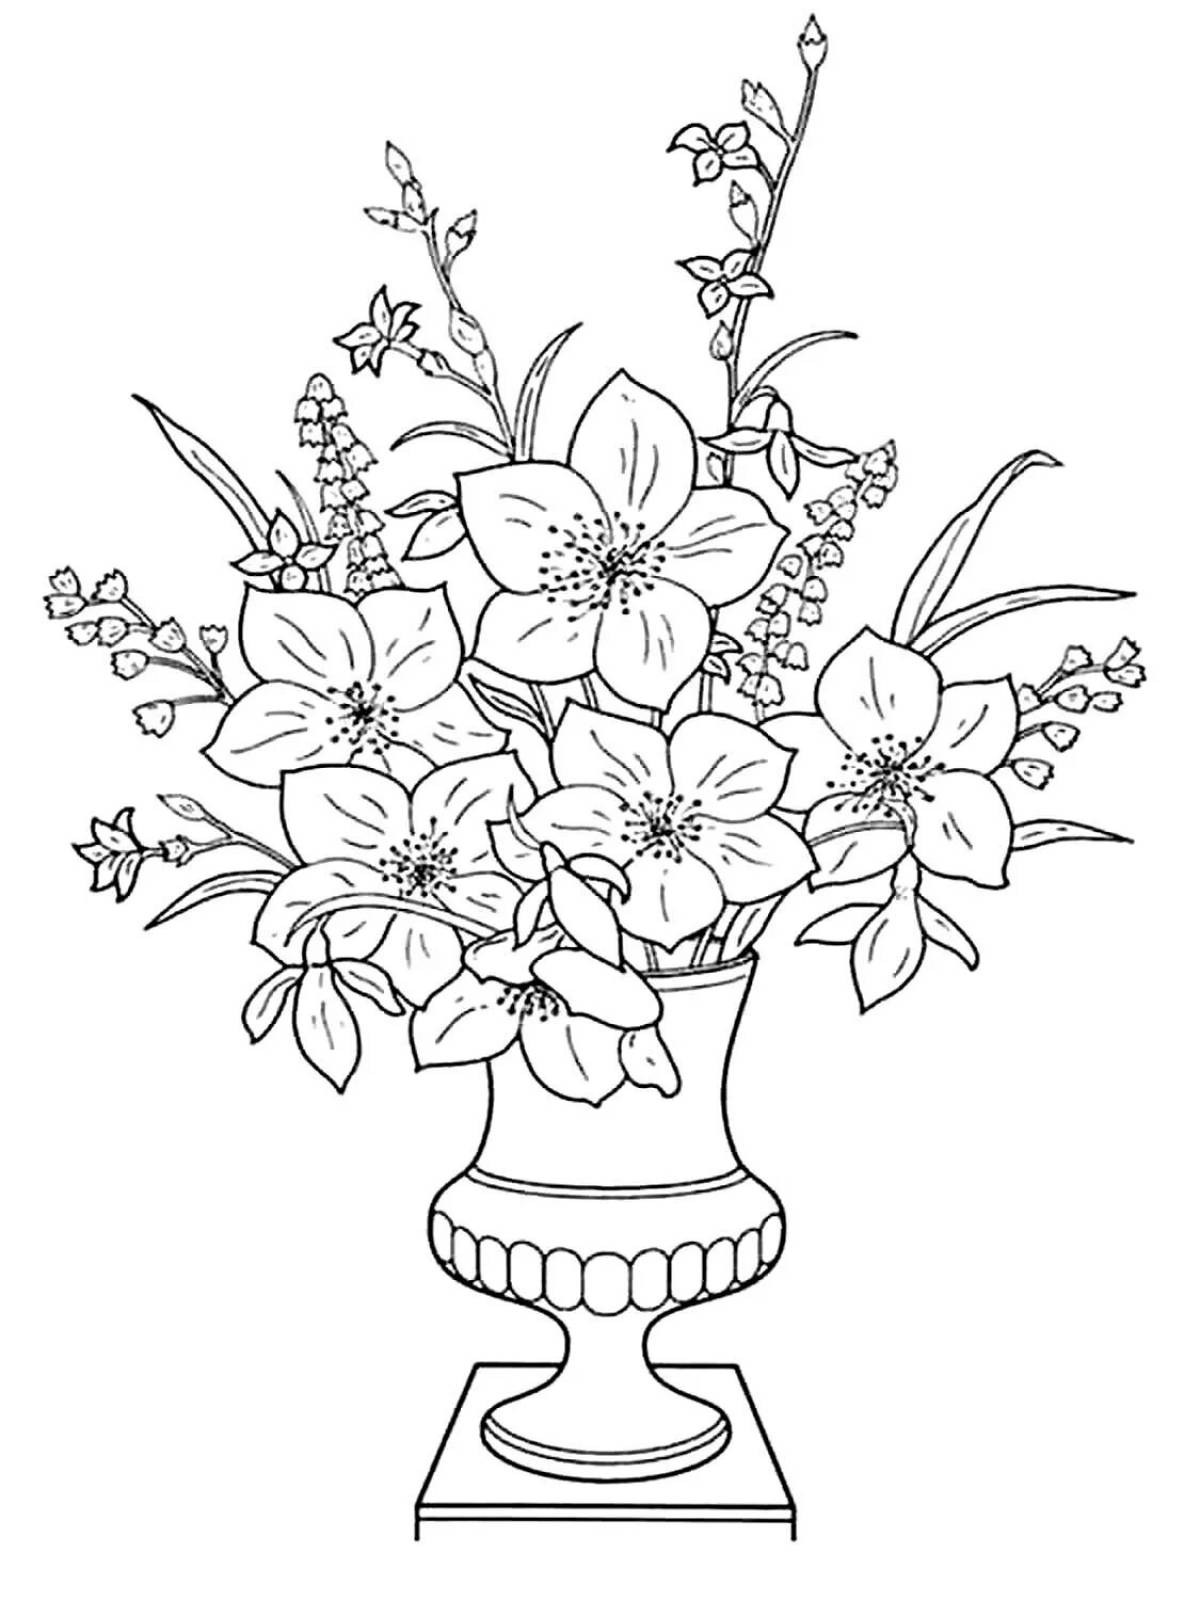 Coloring page majestic bouquet of flowers in a vase